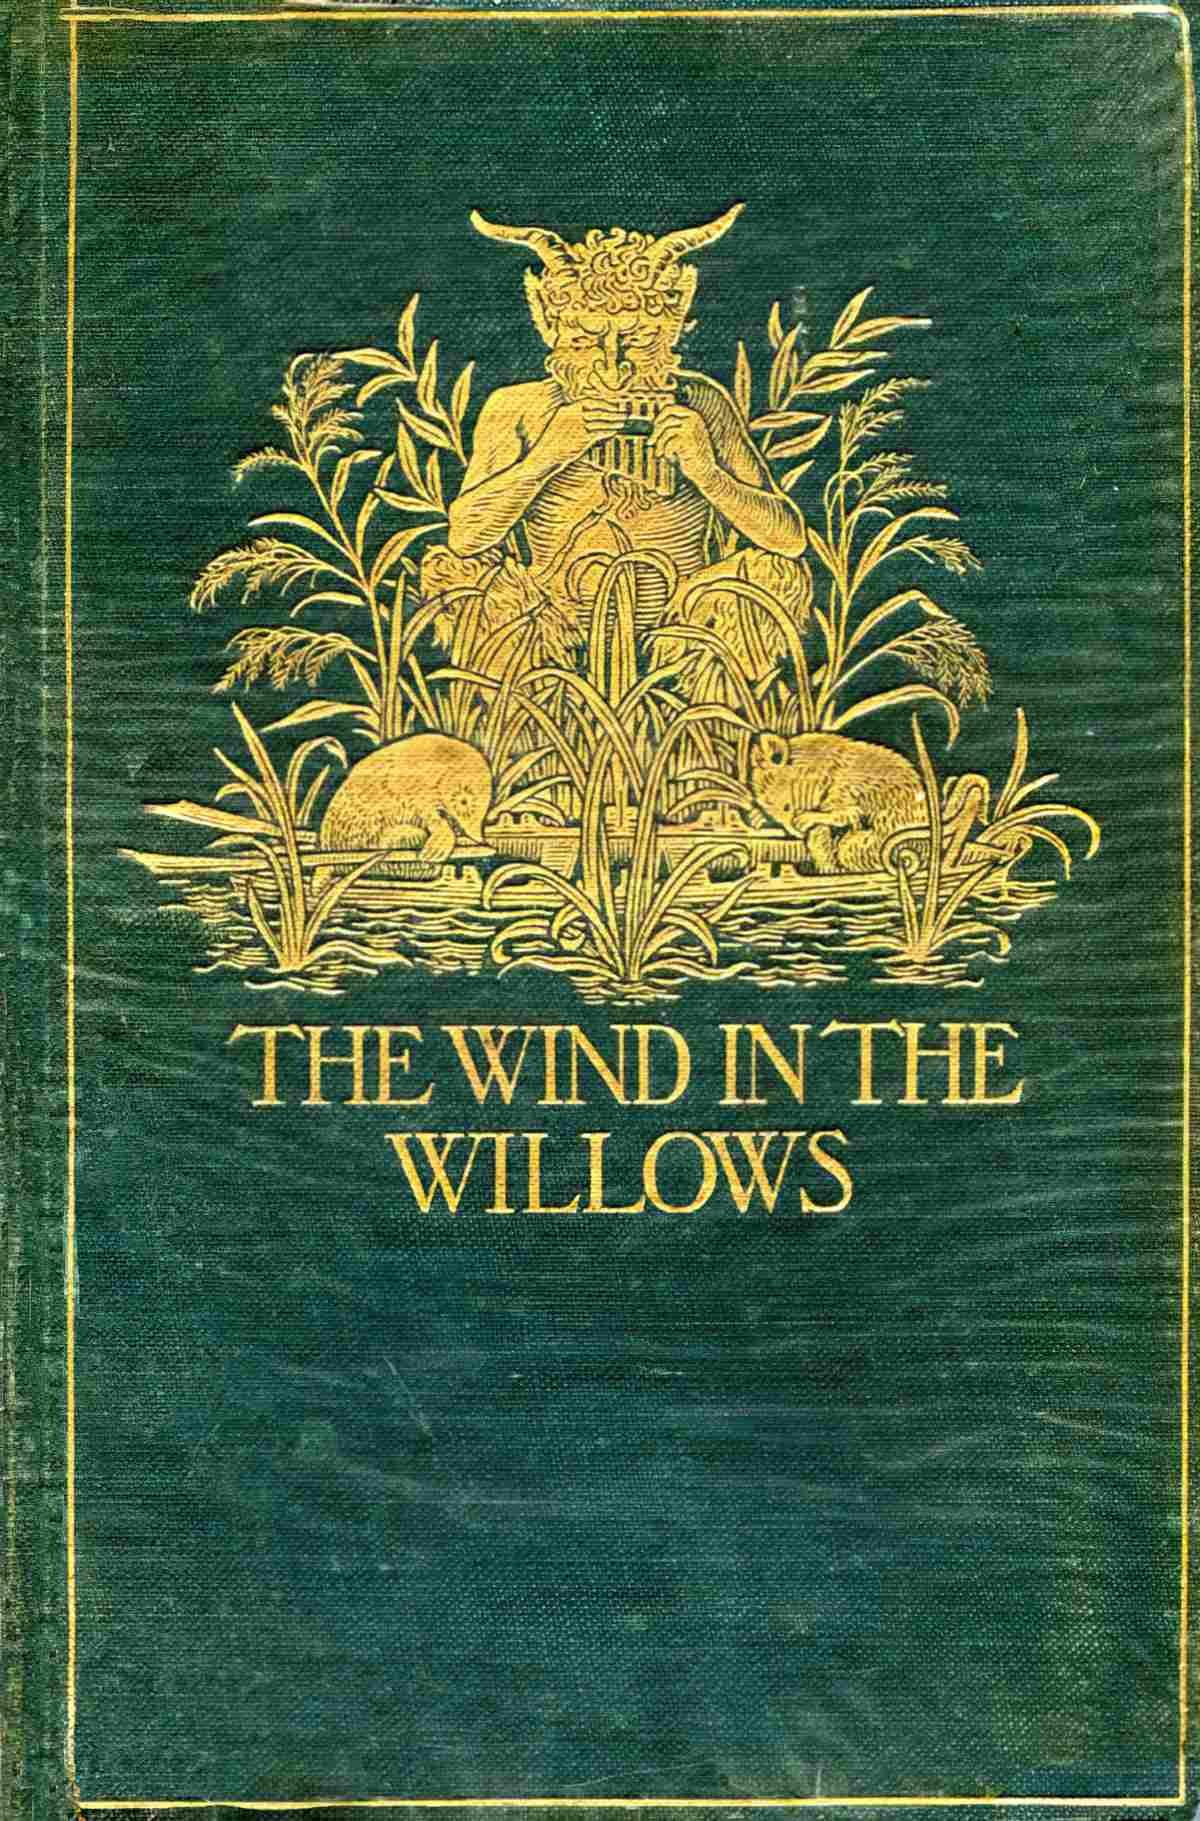 The Wind In The Willows by Kenneth Grahame Analysis